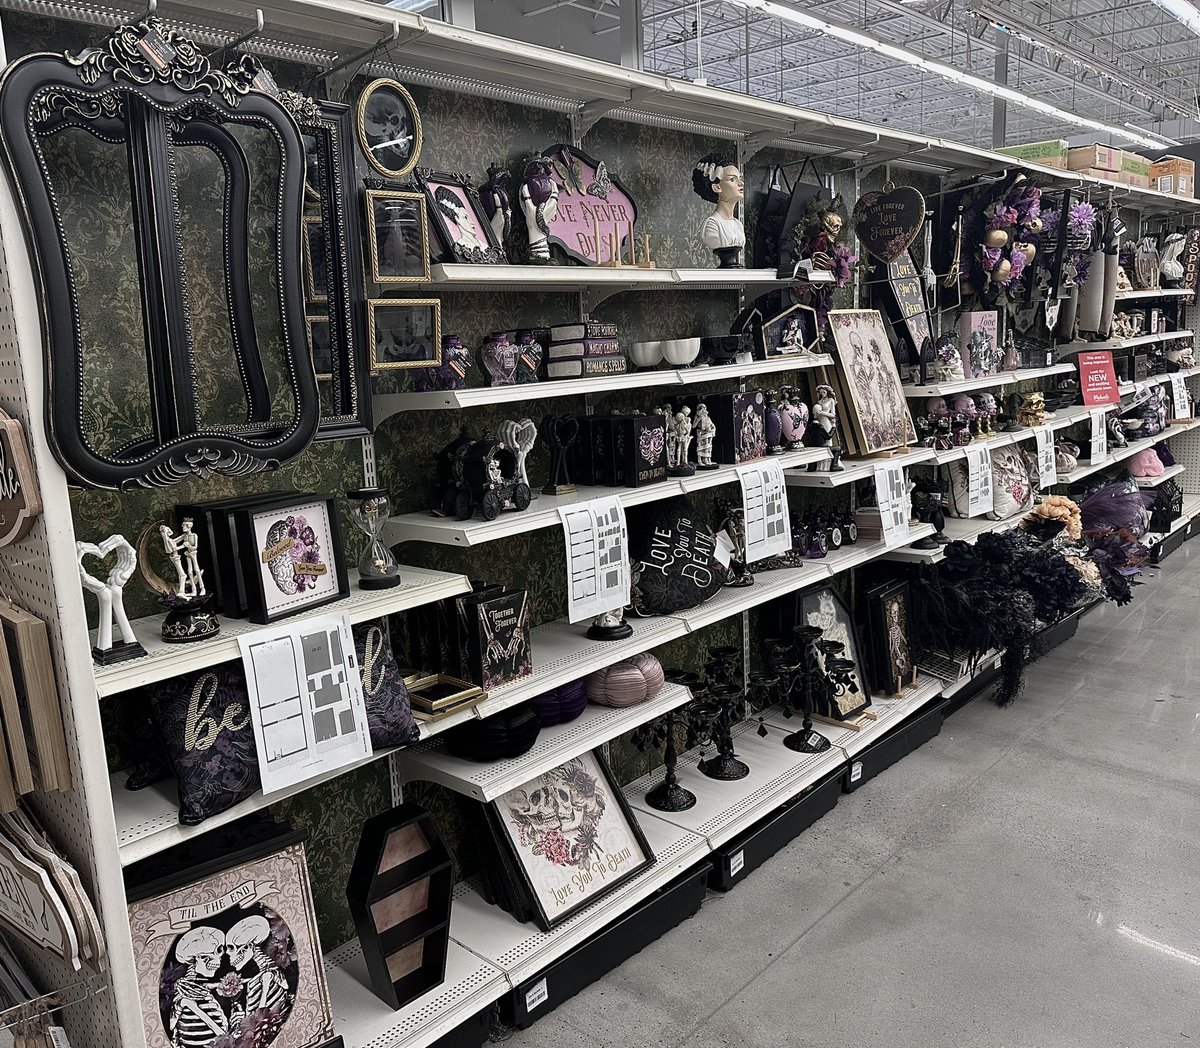 eek the halloween collection at michaels is so good this year